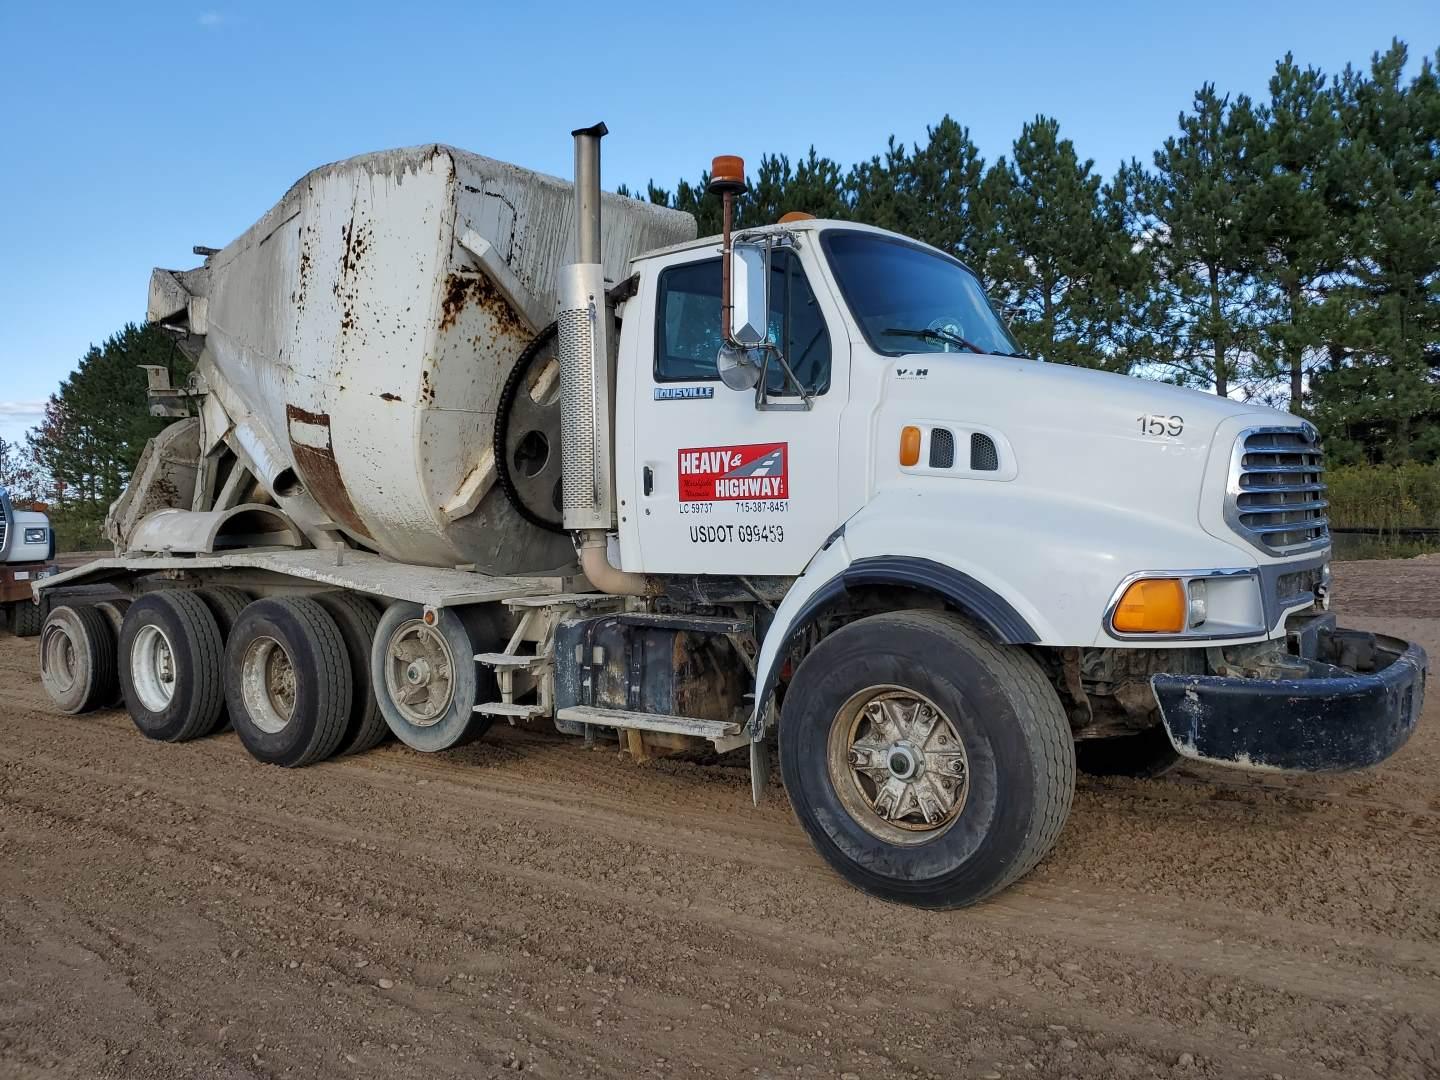 1997 Ford Lt9513 Cement Truck